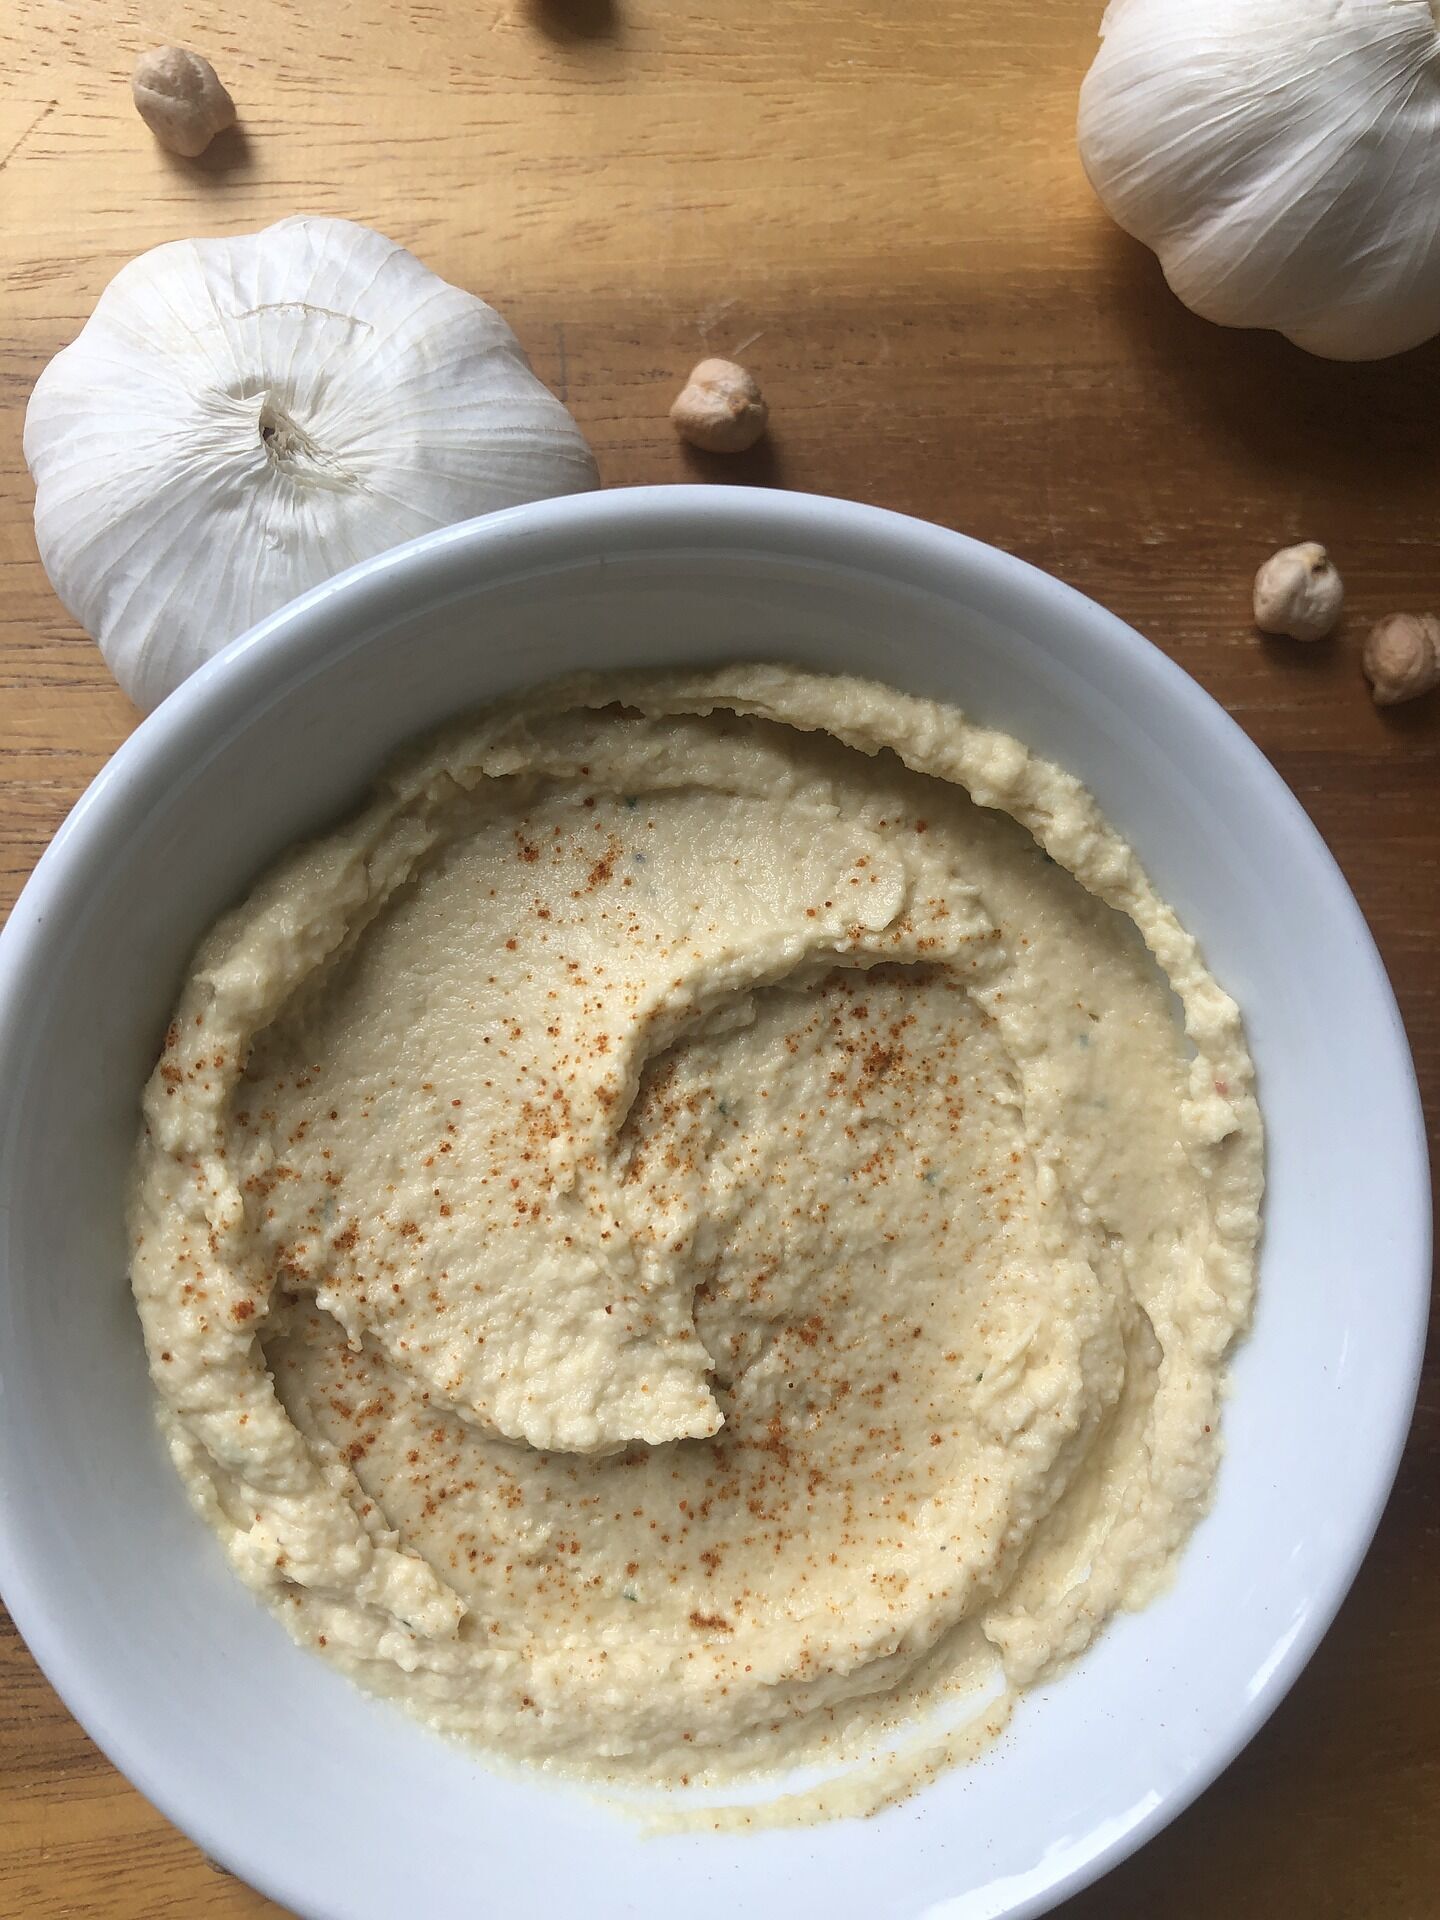 Hummus made from beans